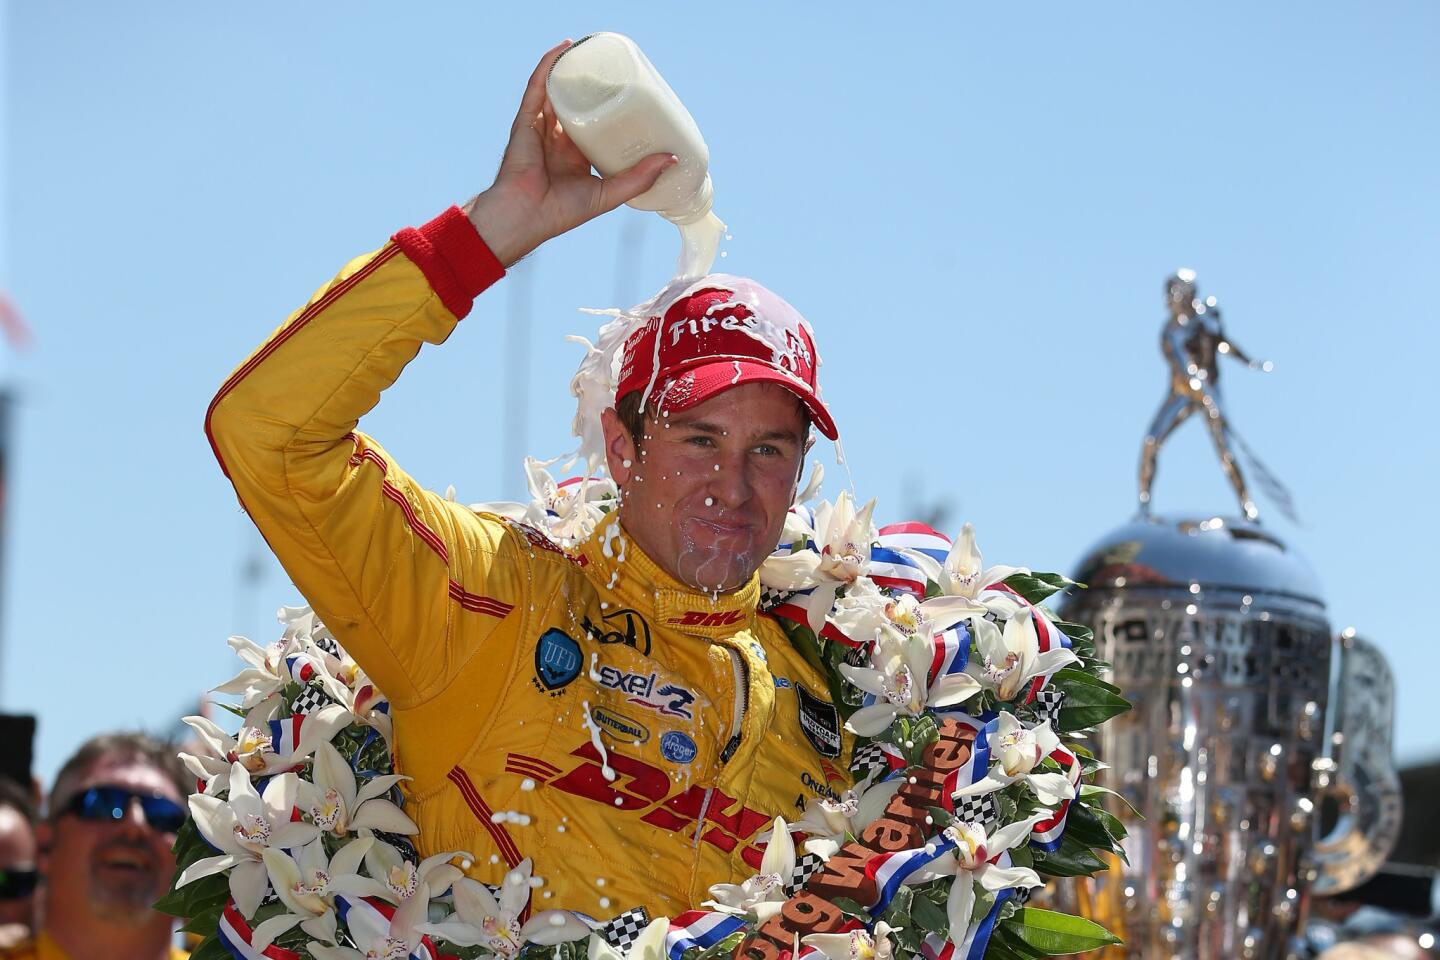 IndyCar driver Ryan Hunter-Reay celebrates in Victory Lane after winning the Indianapolis 500 on Sunday for the first time.